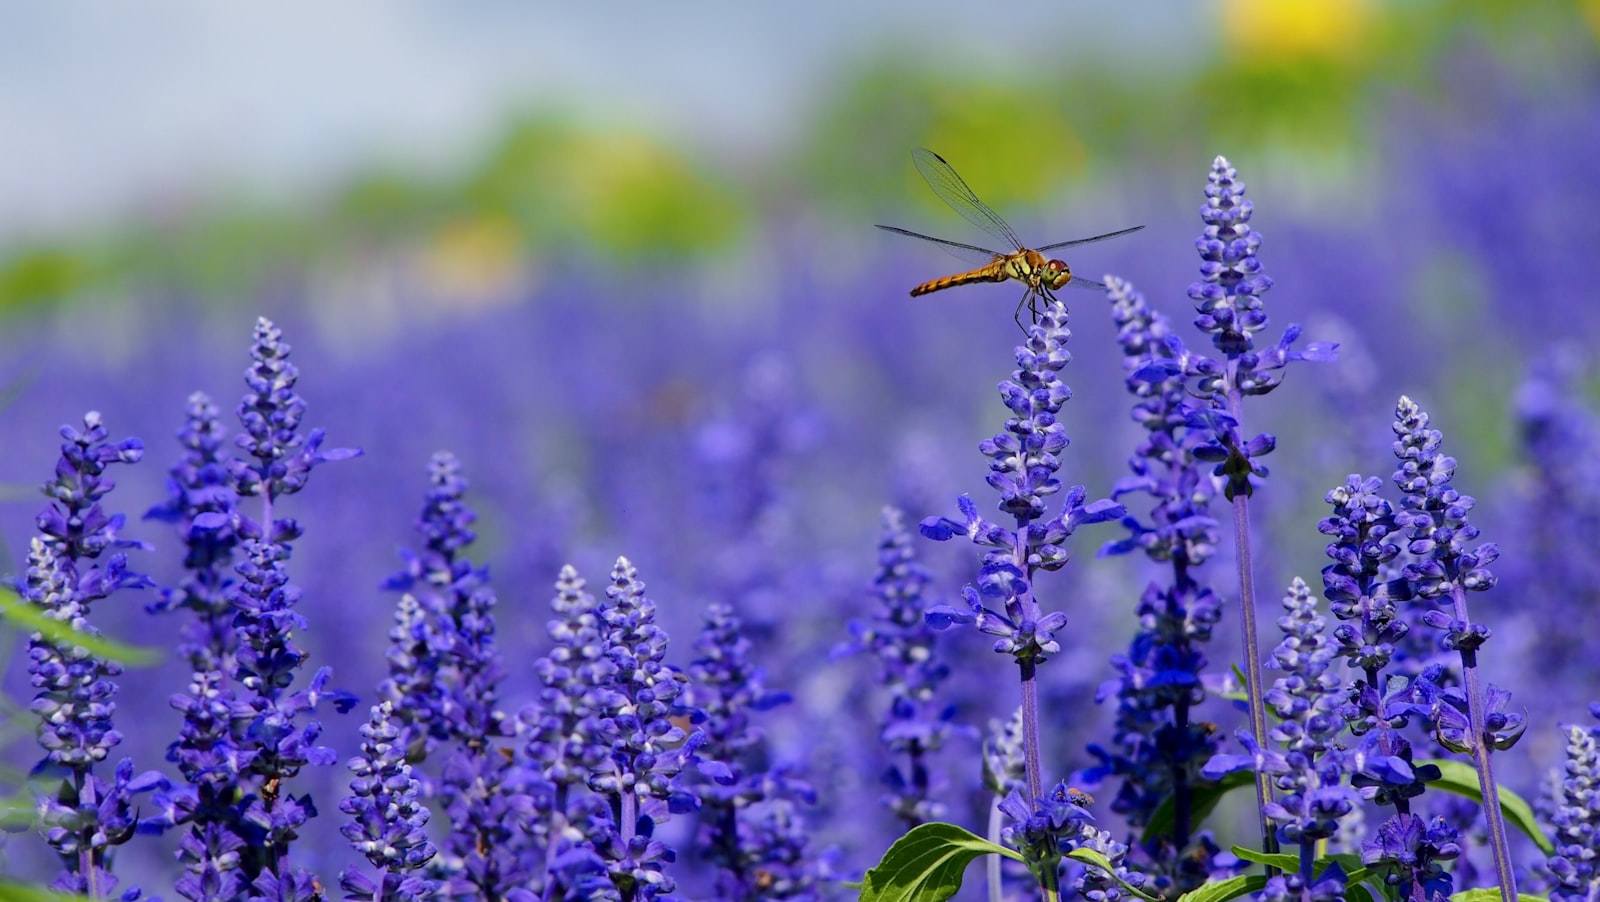 Olympus PEN E-PL3 sample photo. Orange dragonfly perched on photography